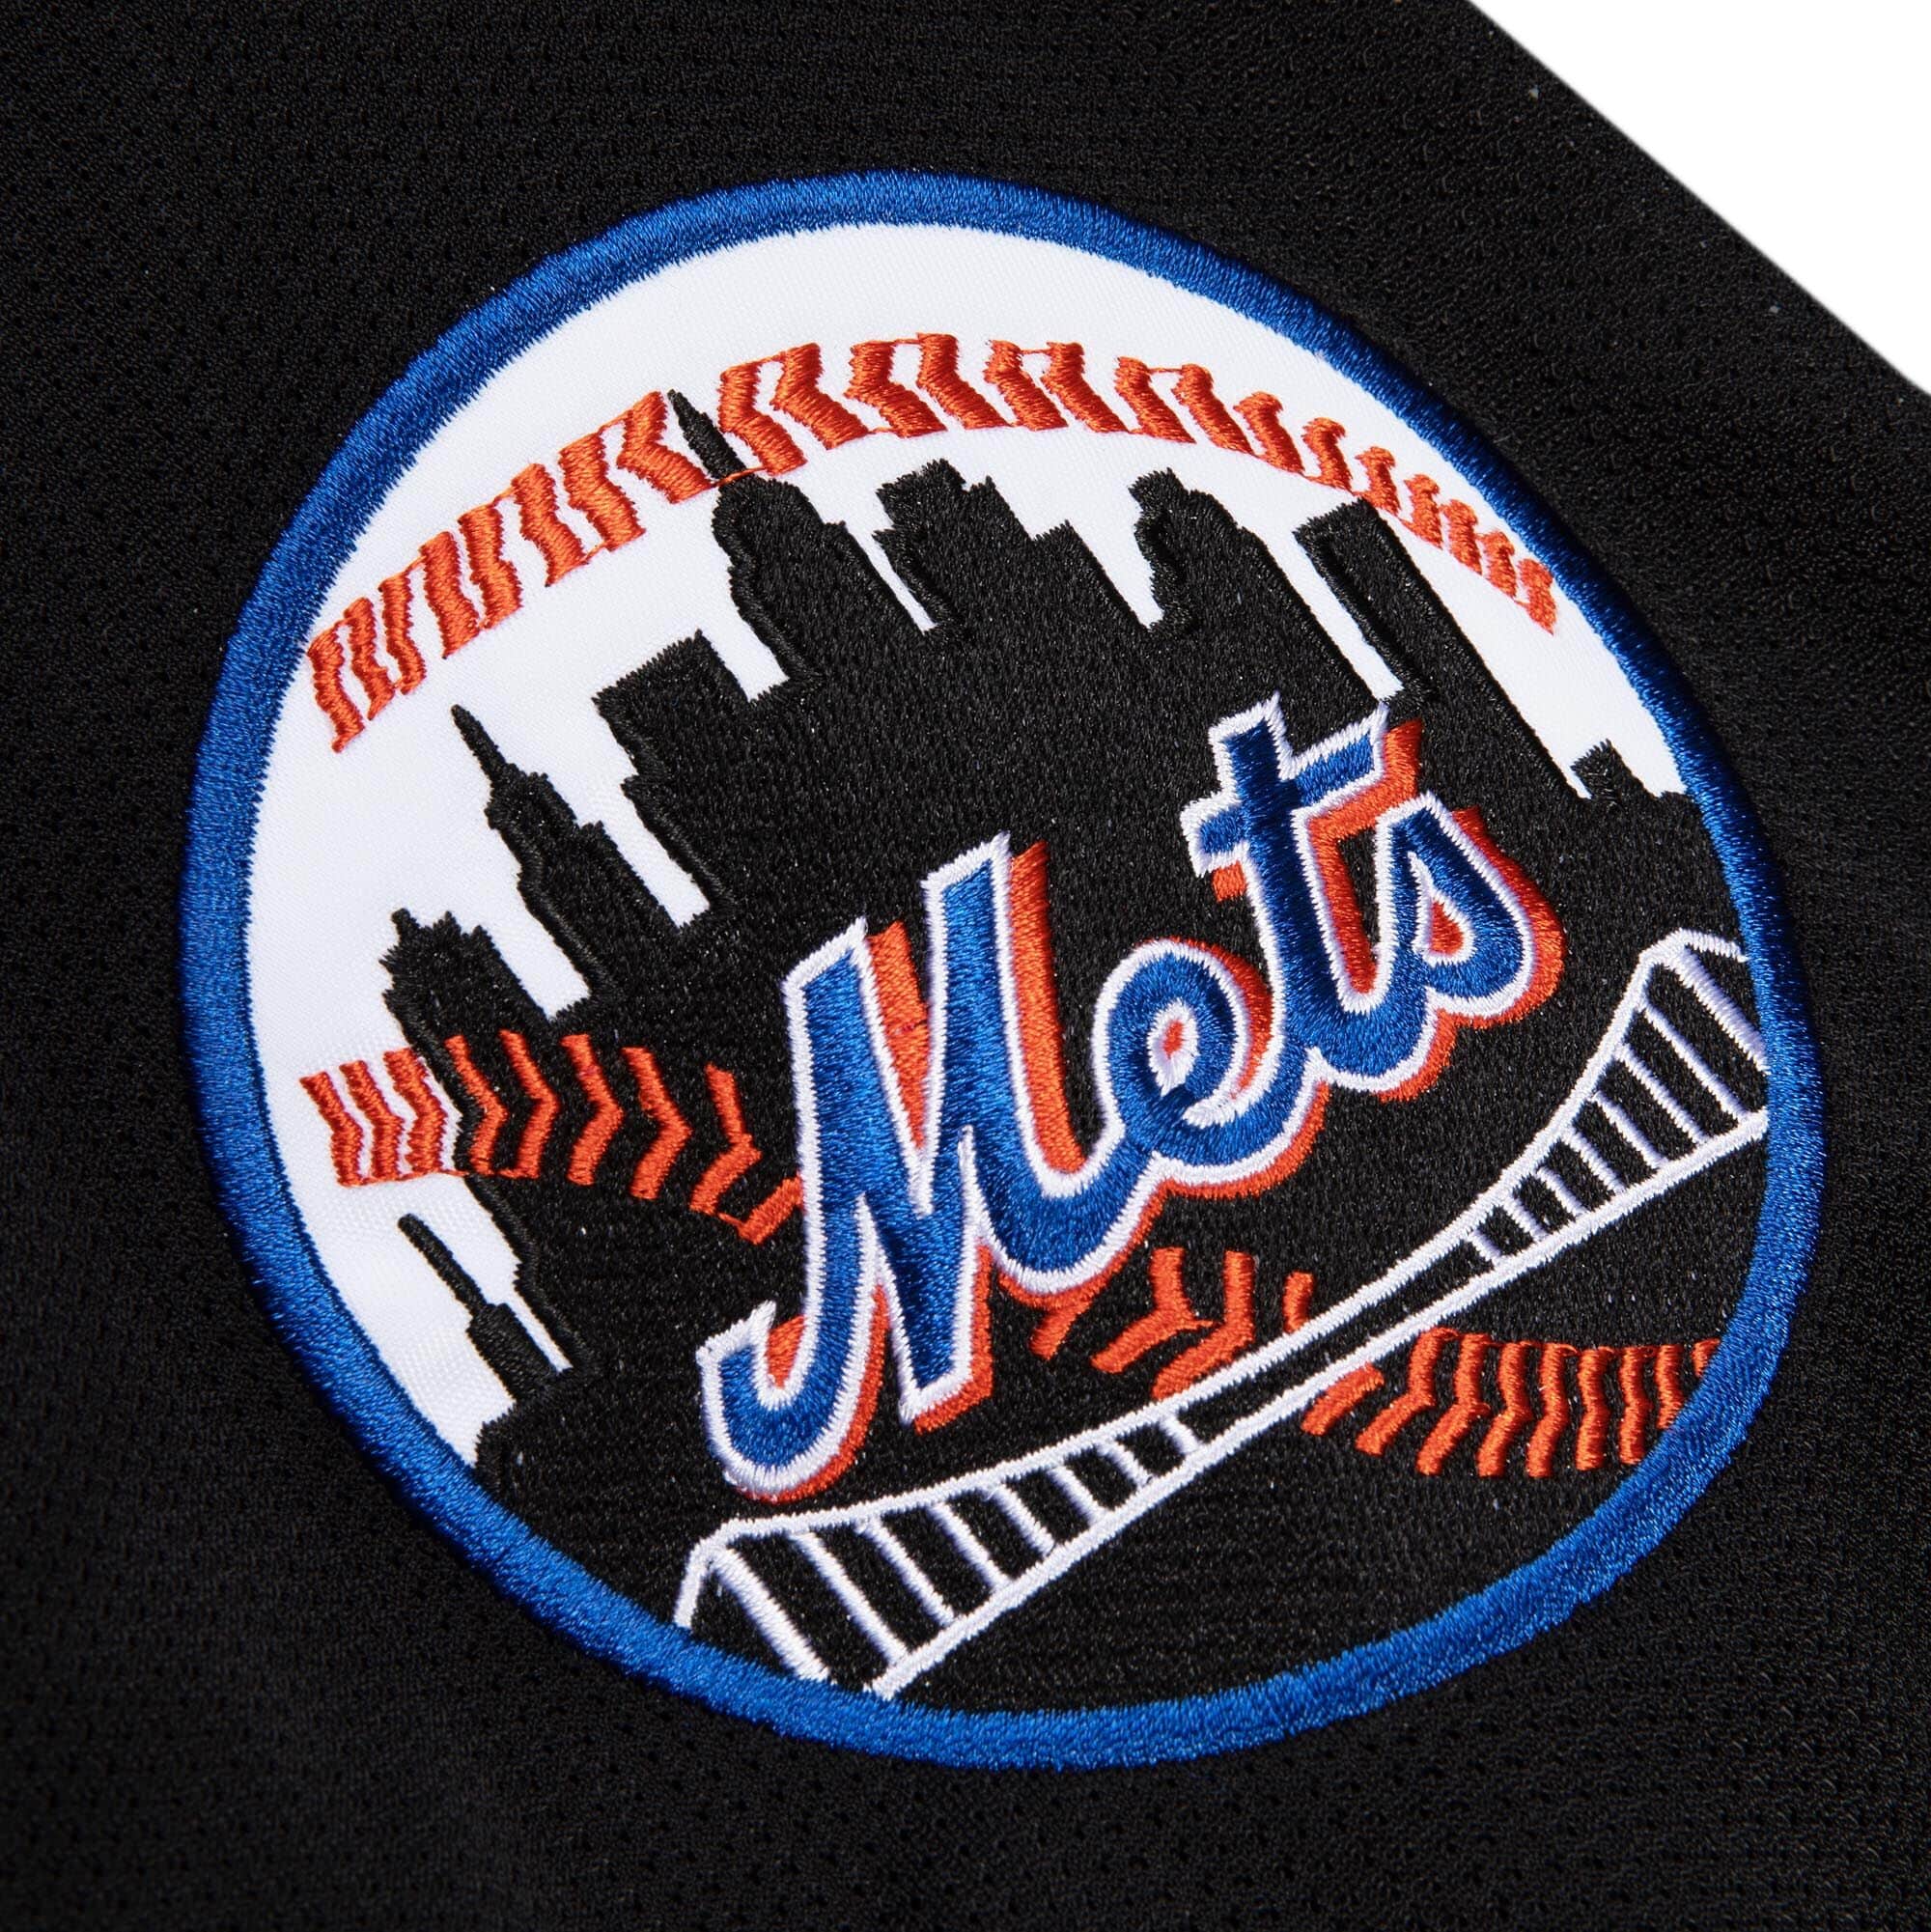 Mike Piazza New York Mets Mitchell & Ness Cooperstown Collection Mesh Batting Practice Jersey - Black